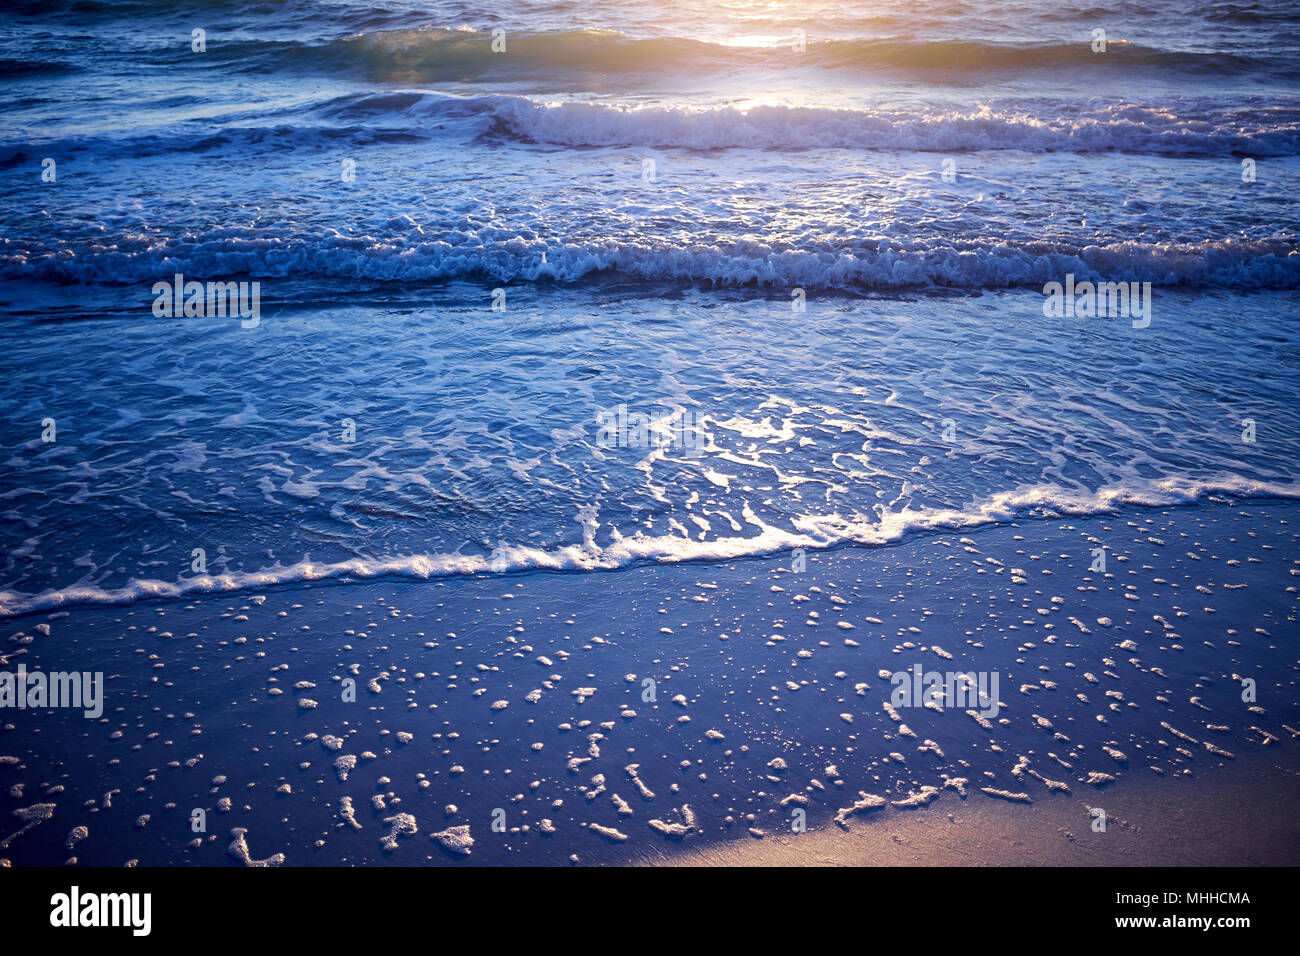 Sunset over gentle surf on Anna Maria Island, Florida with a reflection off the water and wet sand on the beach in a low angle view Stock Photo